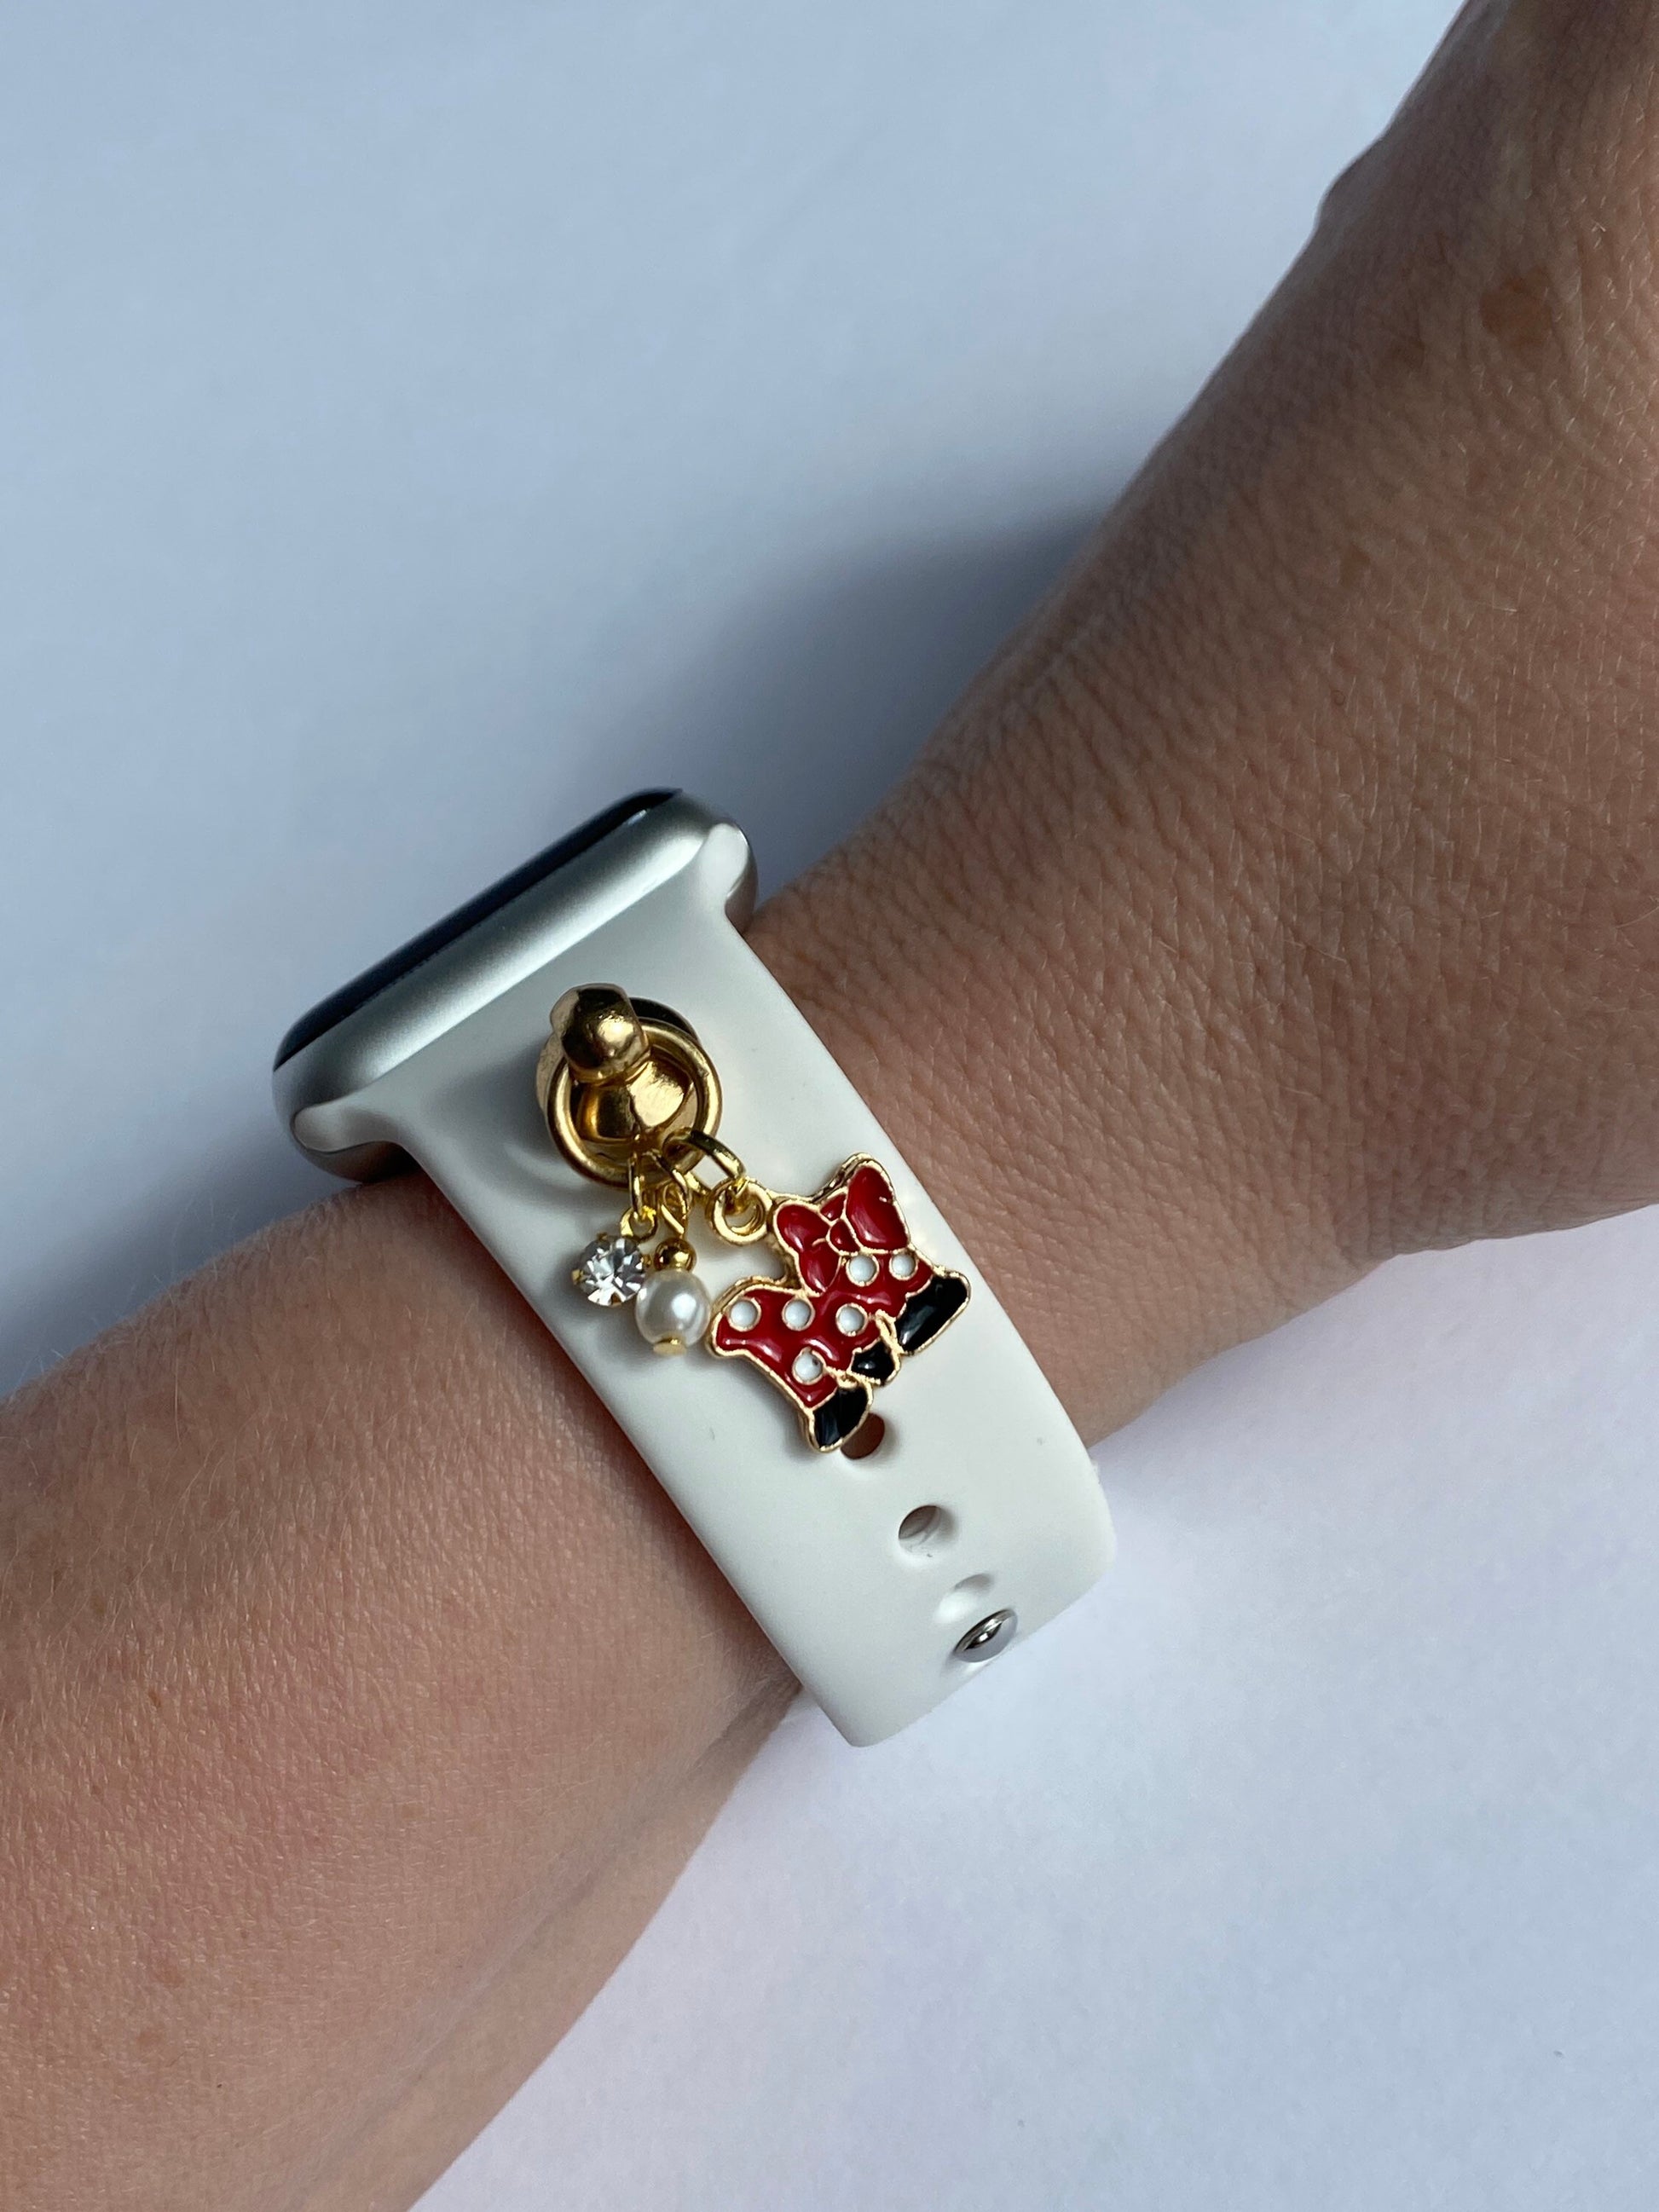 Disney Watchband Charms, Apple Watch Charms, Mickey Watchband, Minnie Mouse, Phone Case Charm, SmartWatch Charm, Apple Charm